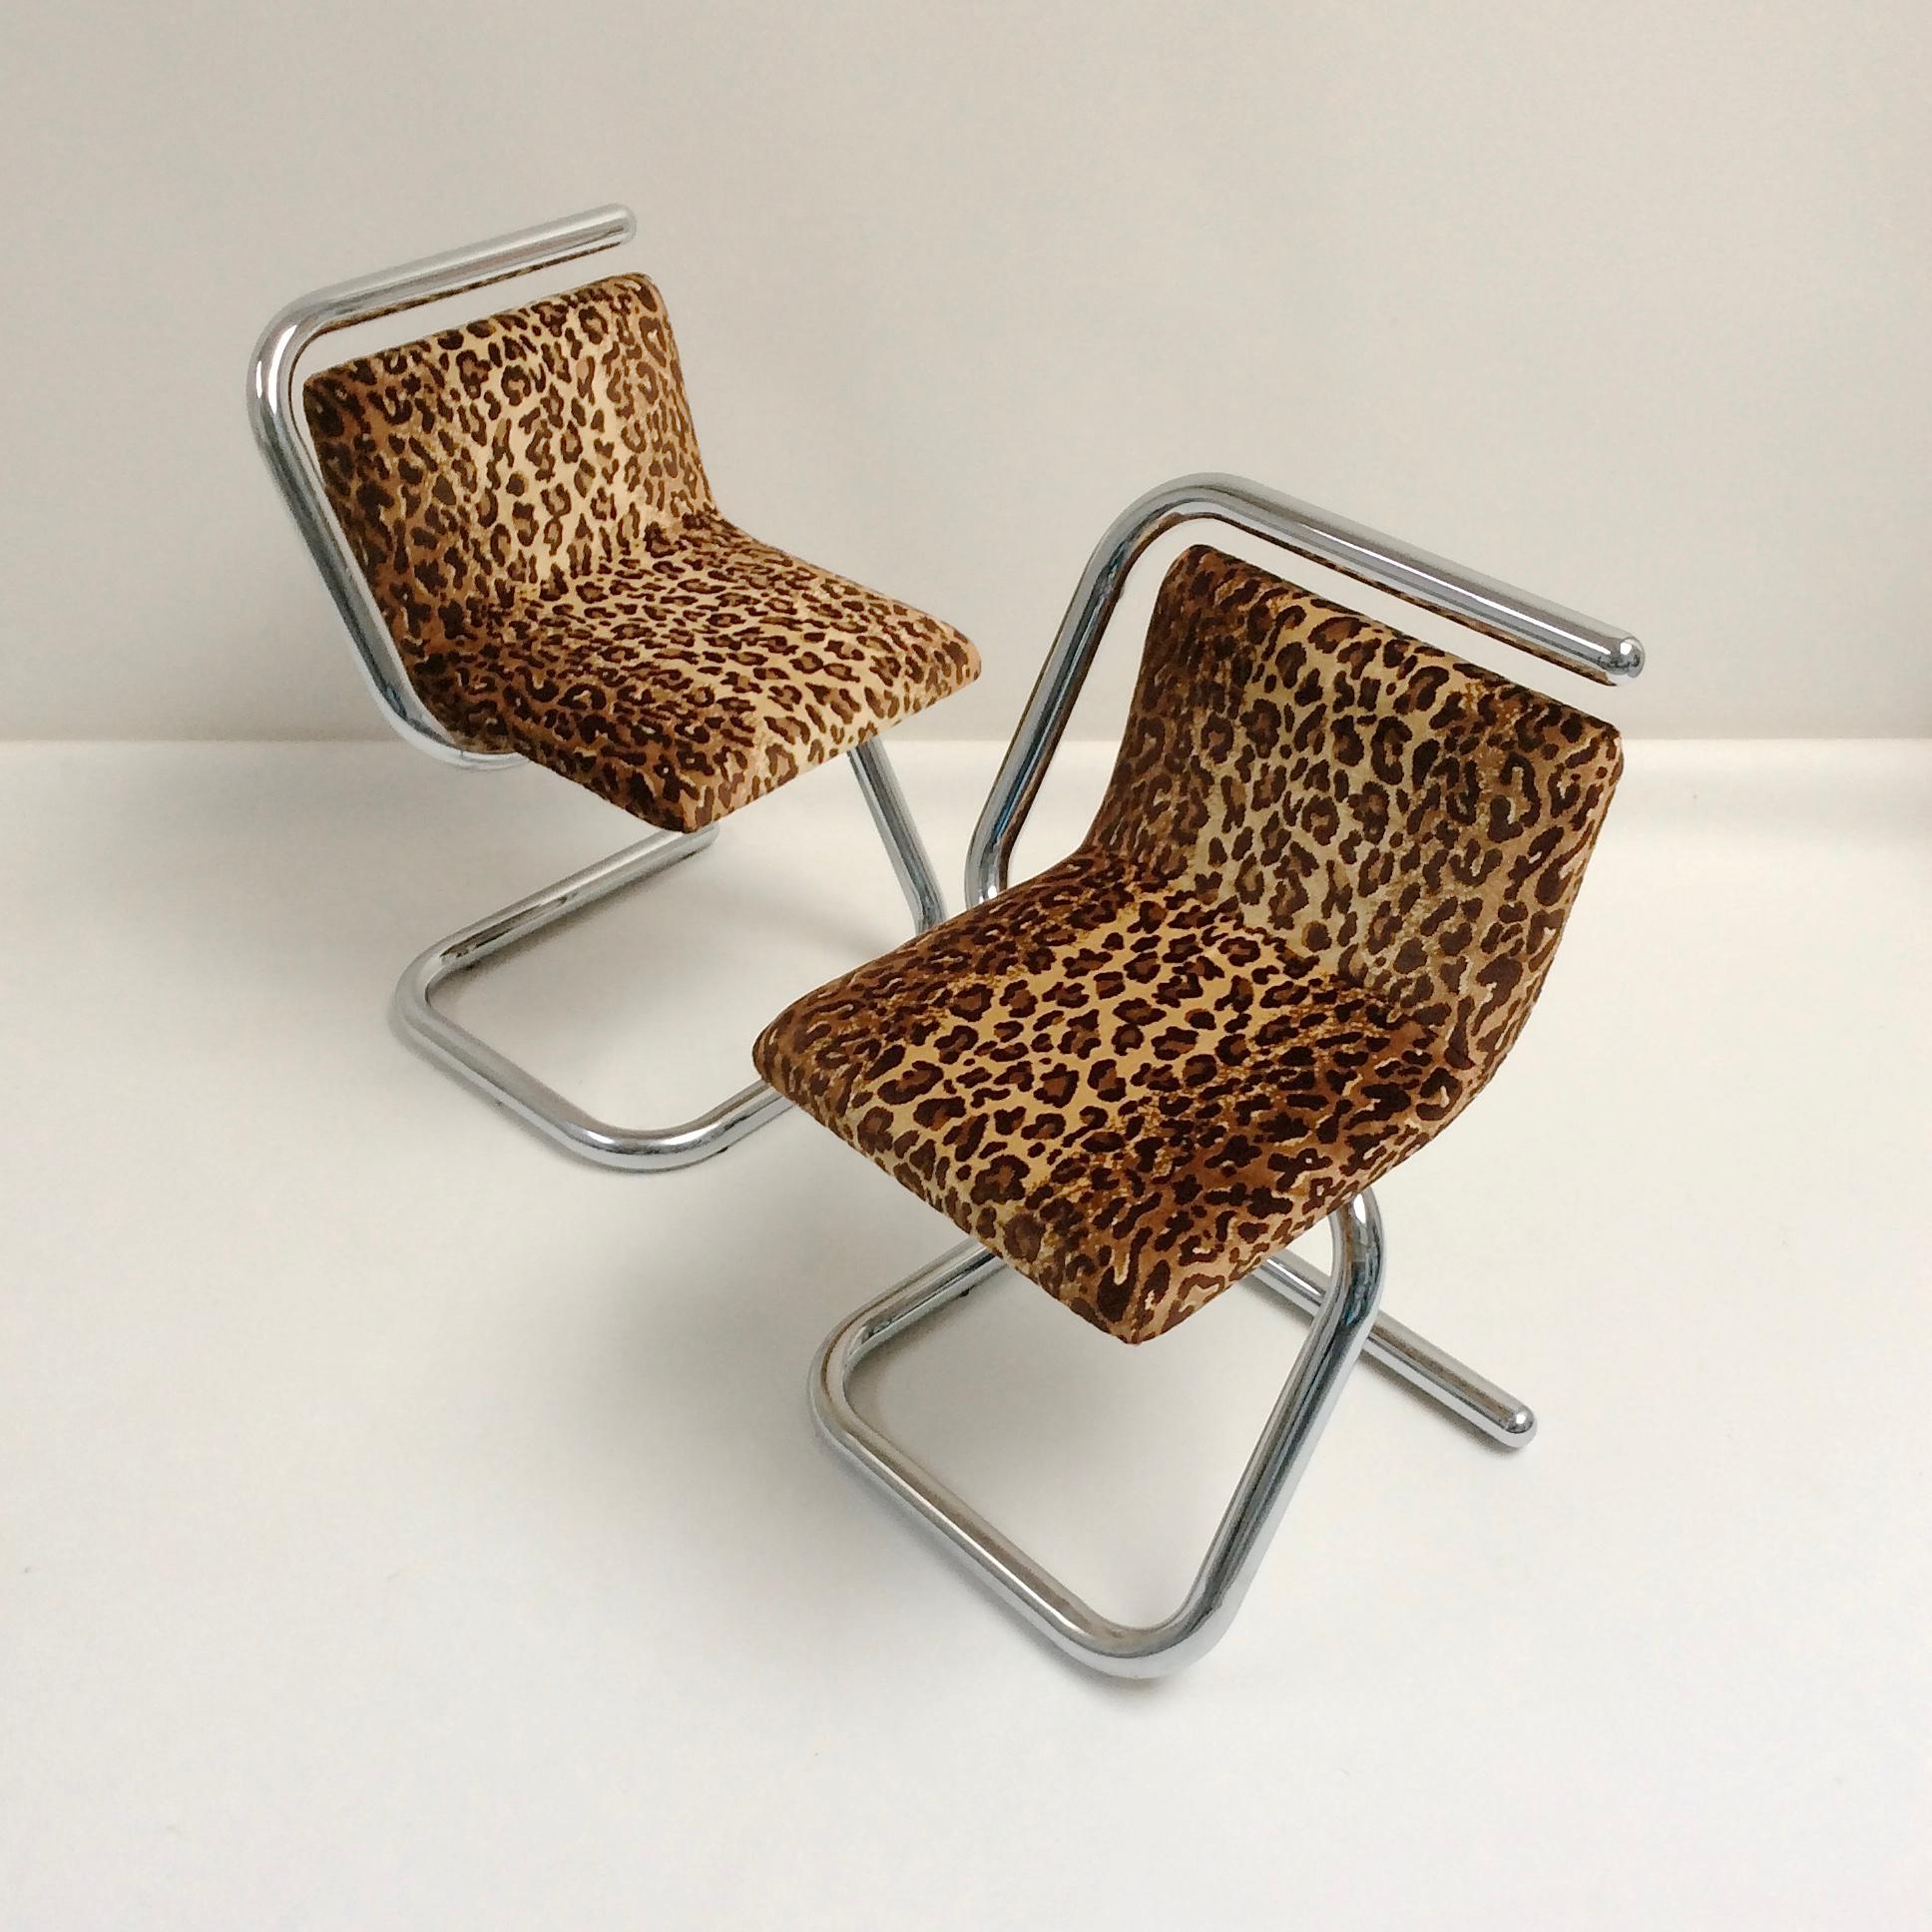 Steel Pair of Mid-Century Modern Chairs, Chrome & Leopard Fabric, circa 1970, Italy